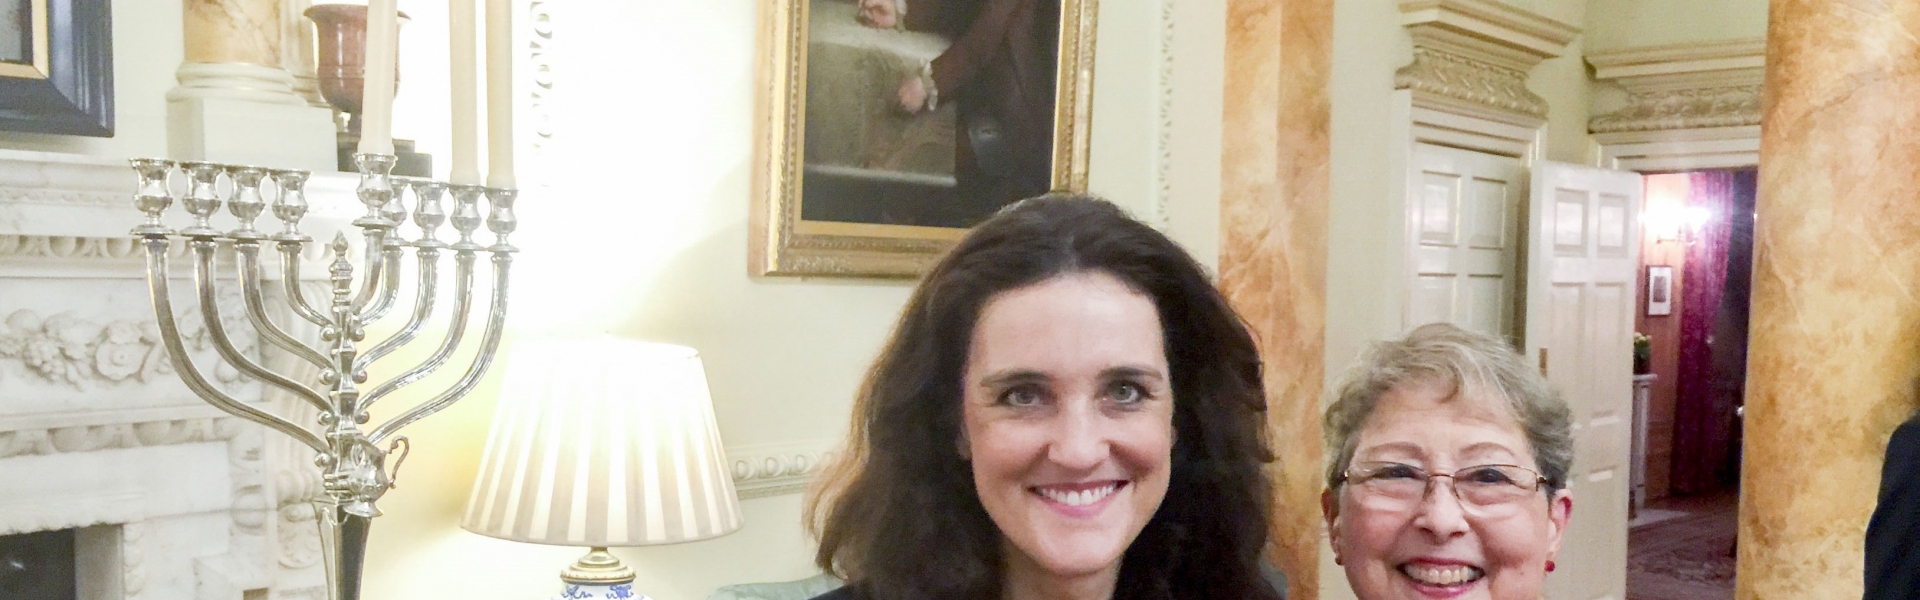 Theresa Villiers attends Chanukah at Downing Street